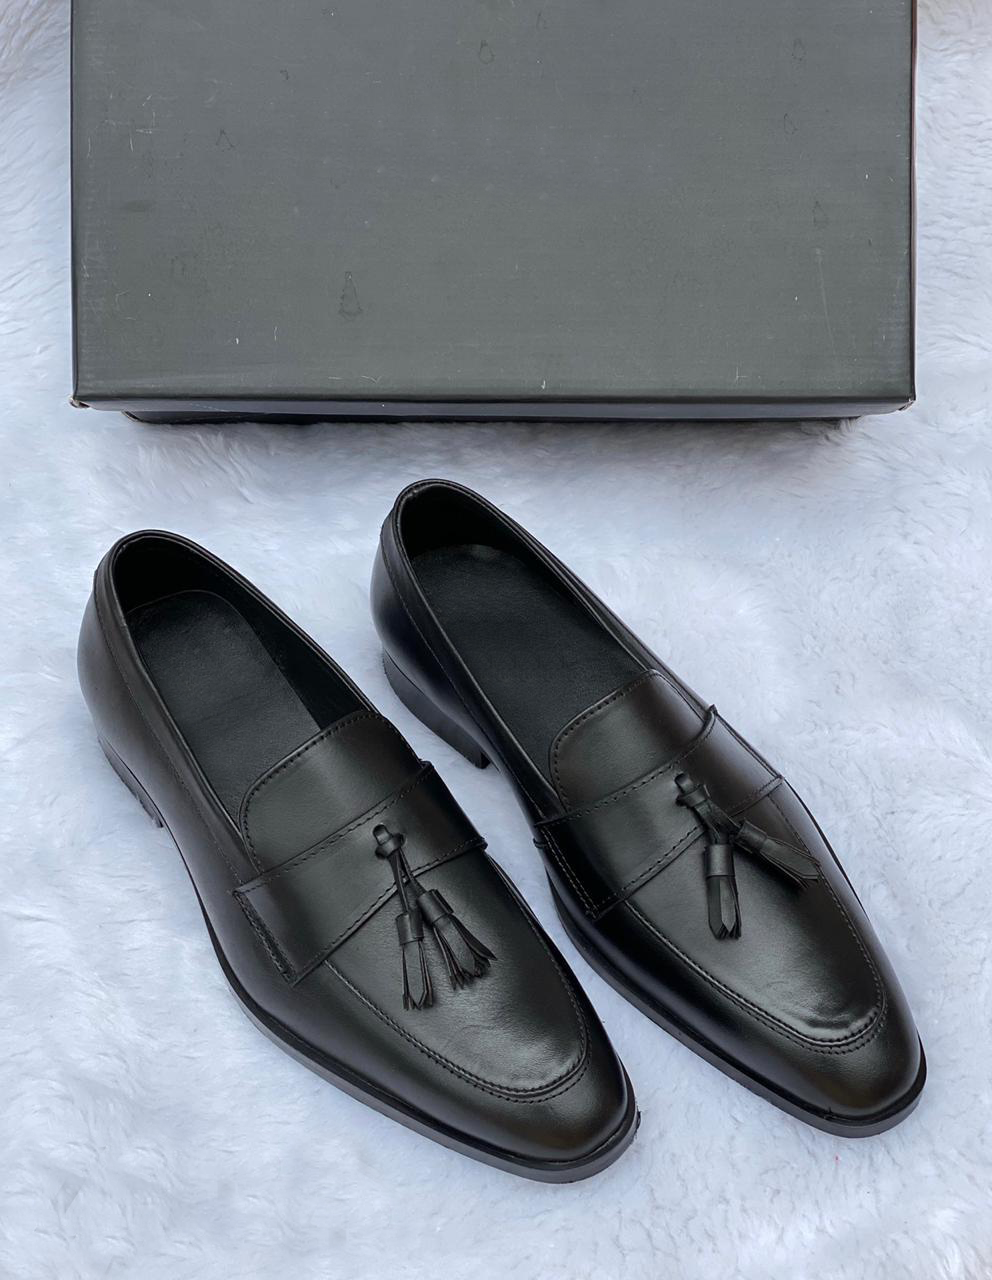 Leather Patent Slipons With Tassles For Men-Unique and Classy